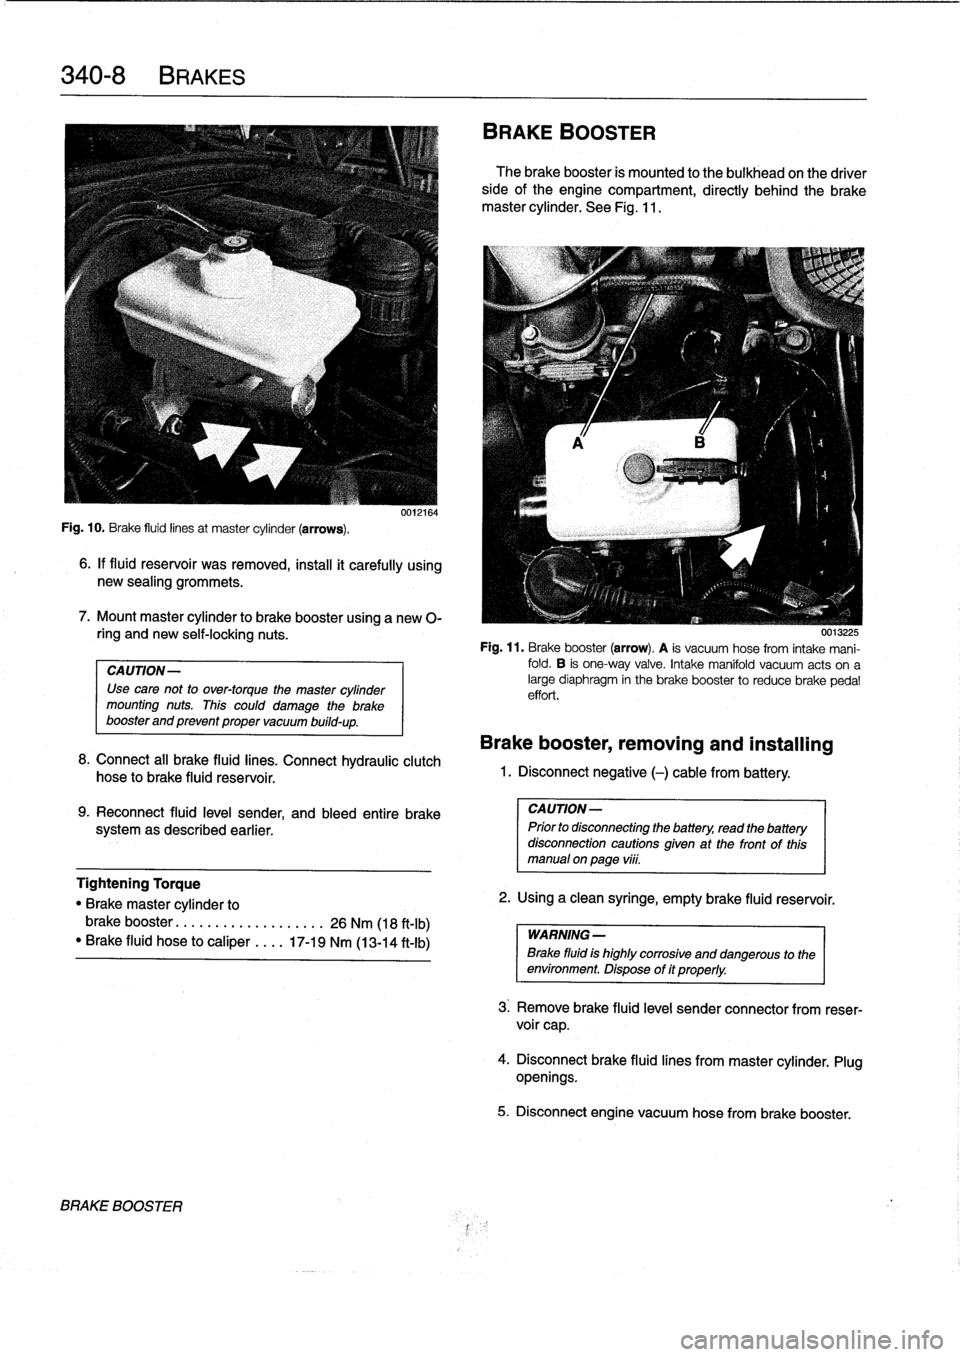 BMW 328i 1994 E36 Owners Guide 
340-
8
BRAKES

Fig
.
10
.
Brake
fluid
linesat
master
cylinder
(arrows)
.

6
.
If
fluid
reservoir
was
removed,
install
it
carefully
using
new
sealing
grommets
.

7
.
Mount
master
cylinder
to
brake
boo